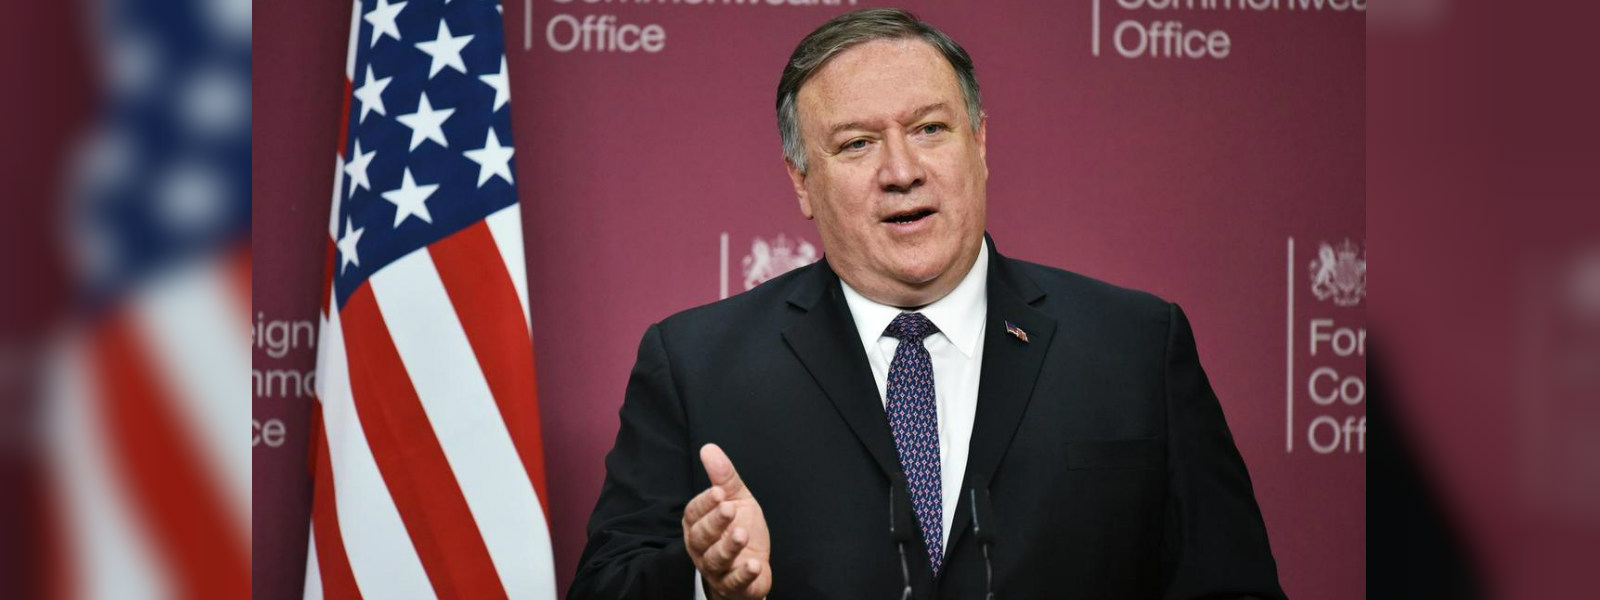 Pompeo says more U.S. action coming to support Venezuelan opposition leader